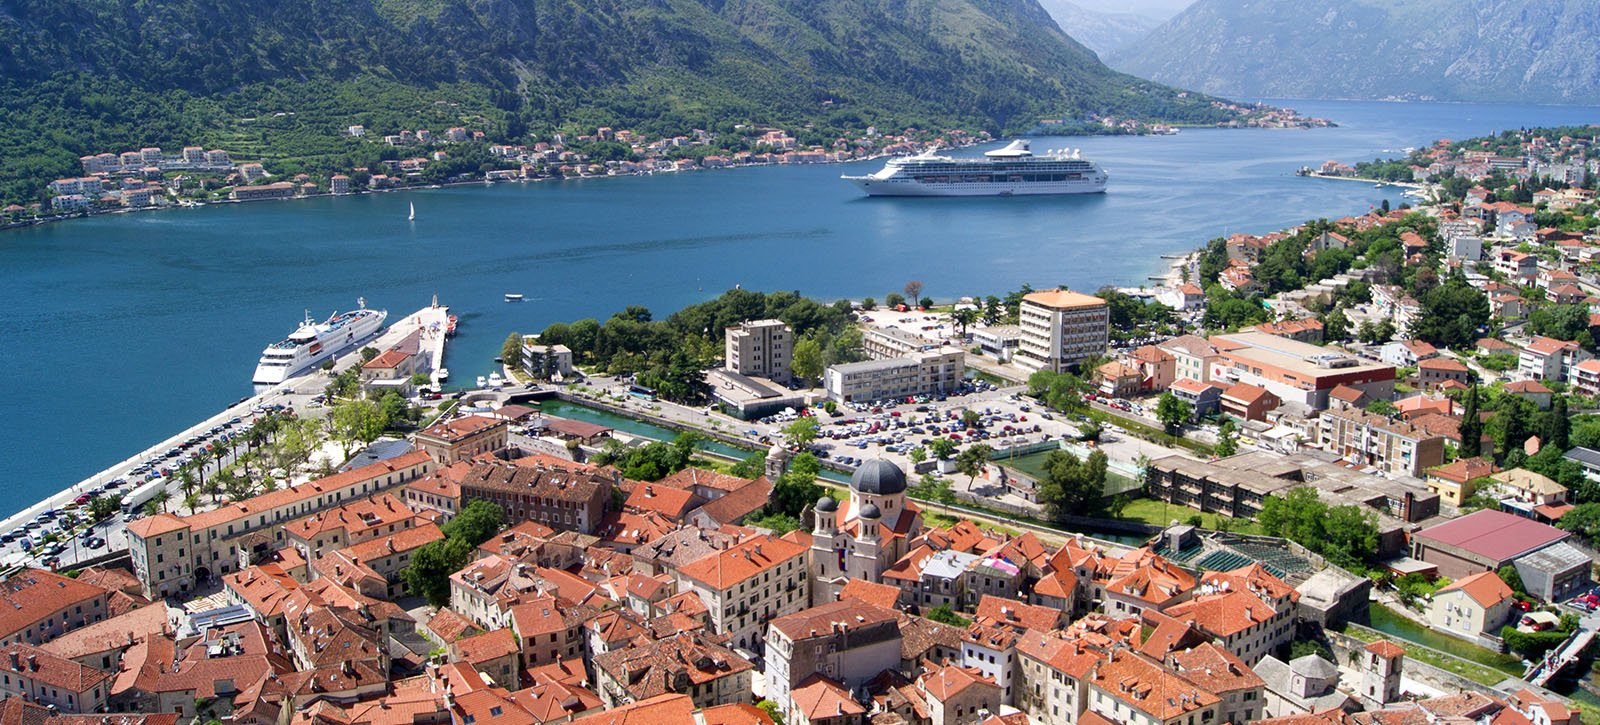 Montenegro Citizenship by Investment Program from €350,000.